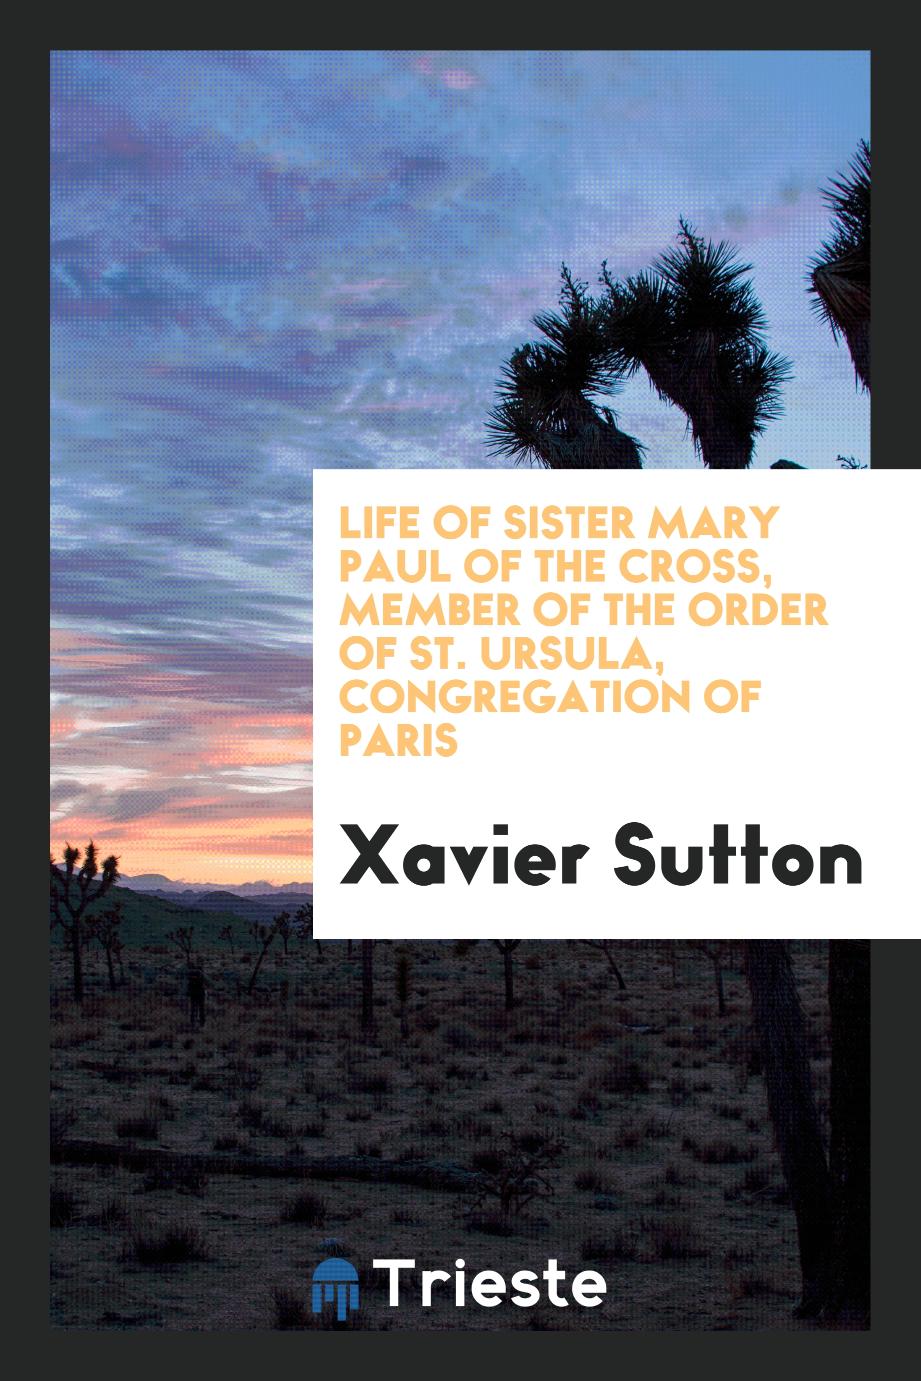 Life of Sister Mary Paul of the cross, member of the order of St. Ursula, Congregation of Paris